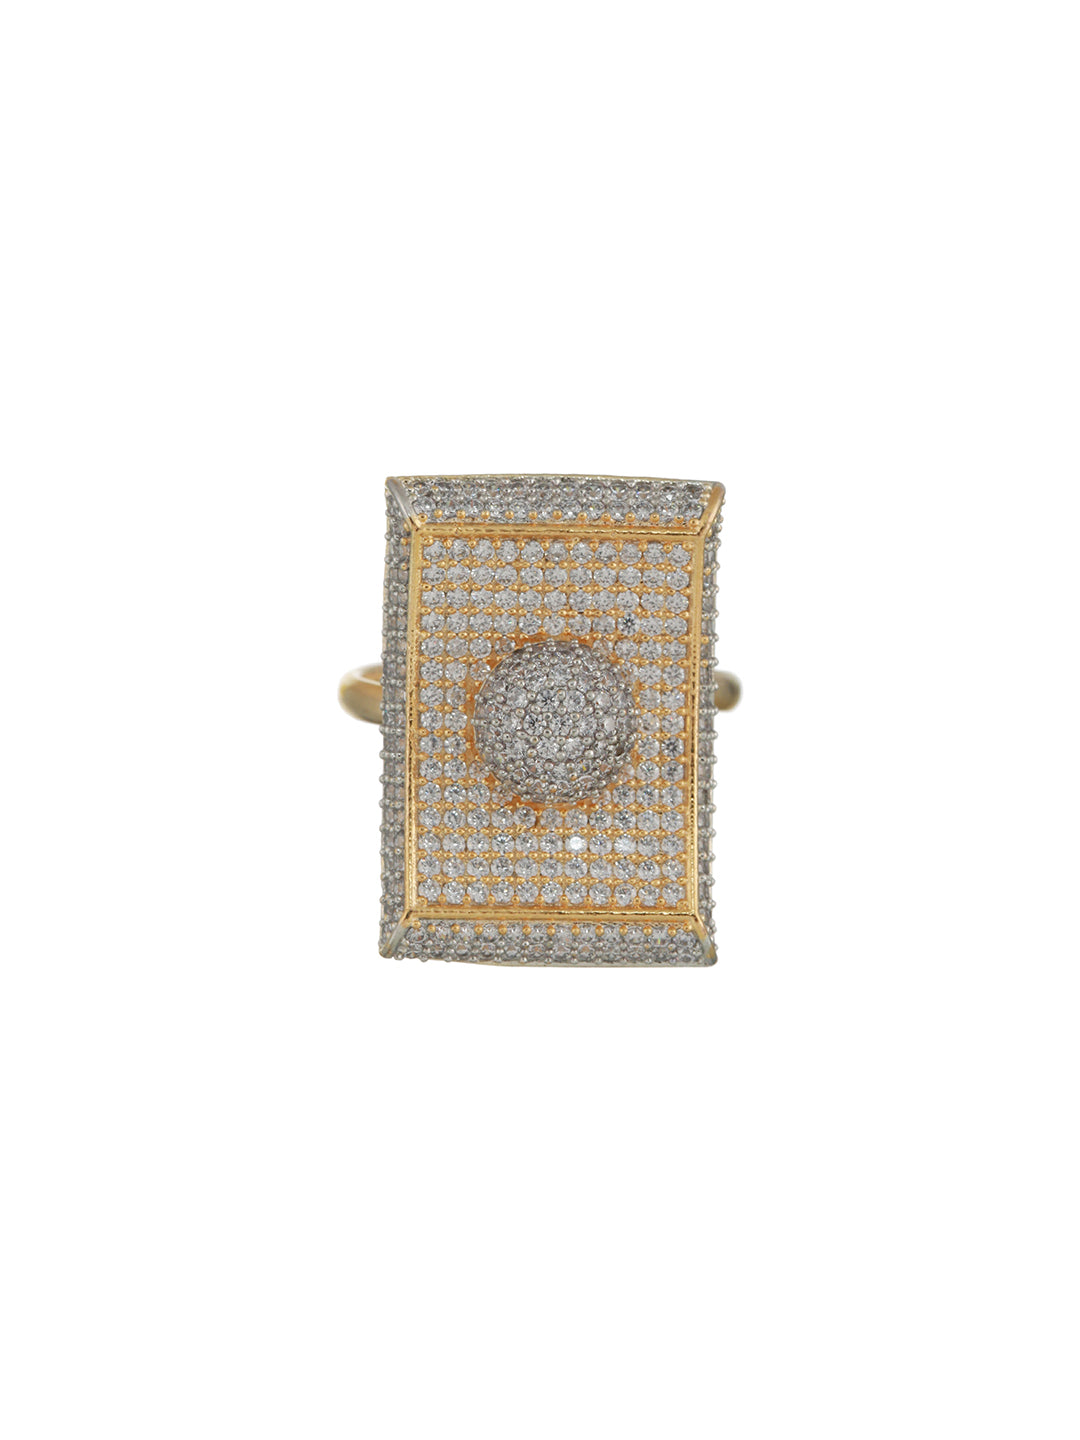 Geometric Design AD Studded Gold-Plated Cocktail Ring